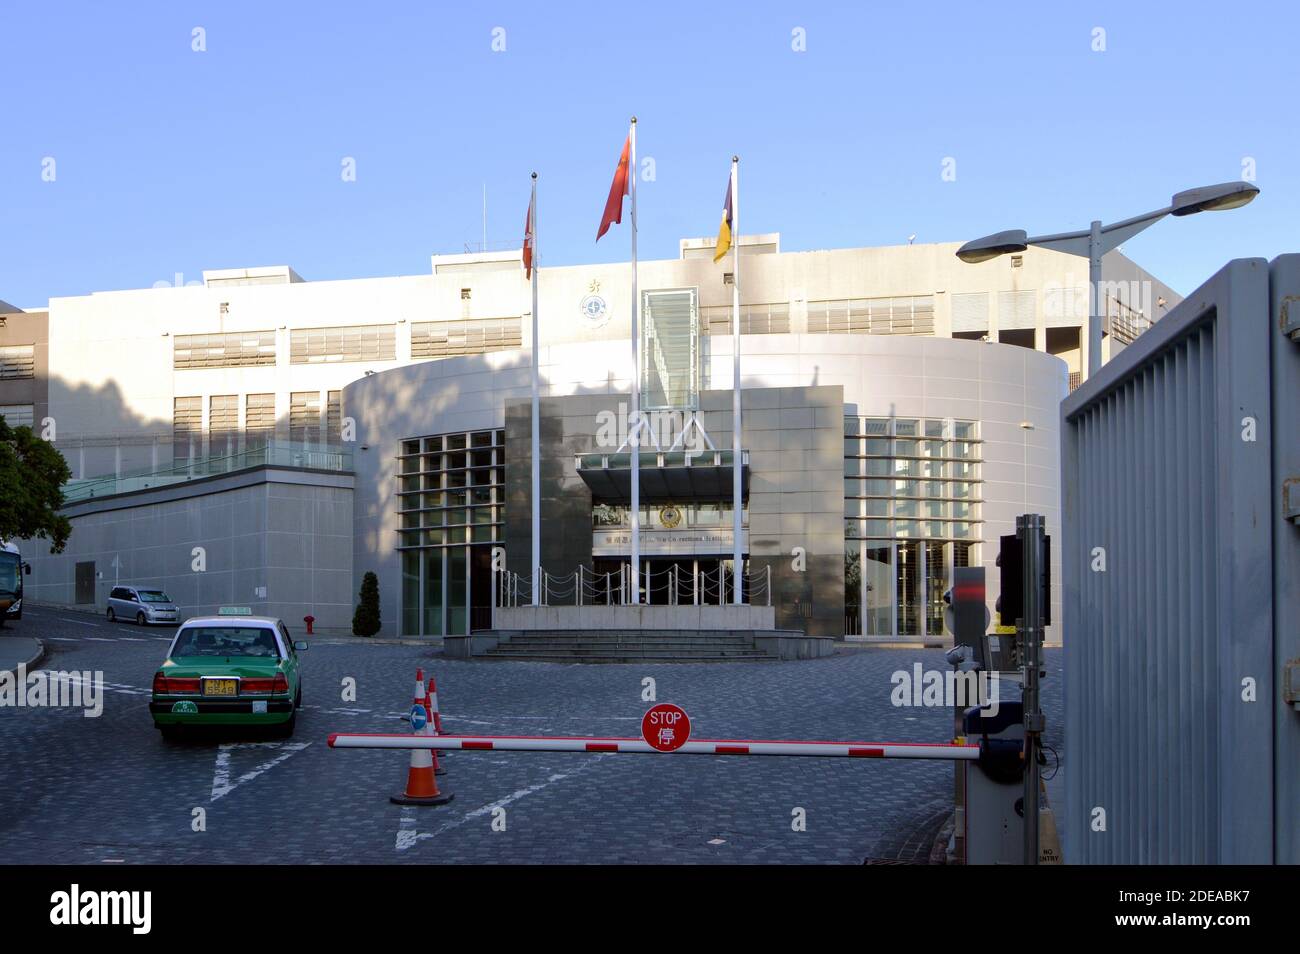 Entrance of Lo Wu Correctional Institution, a women's prison near Sheung Shui, Hong Kong operated by the Correctional Services Department Stock Photo